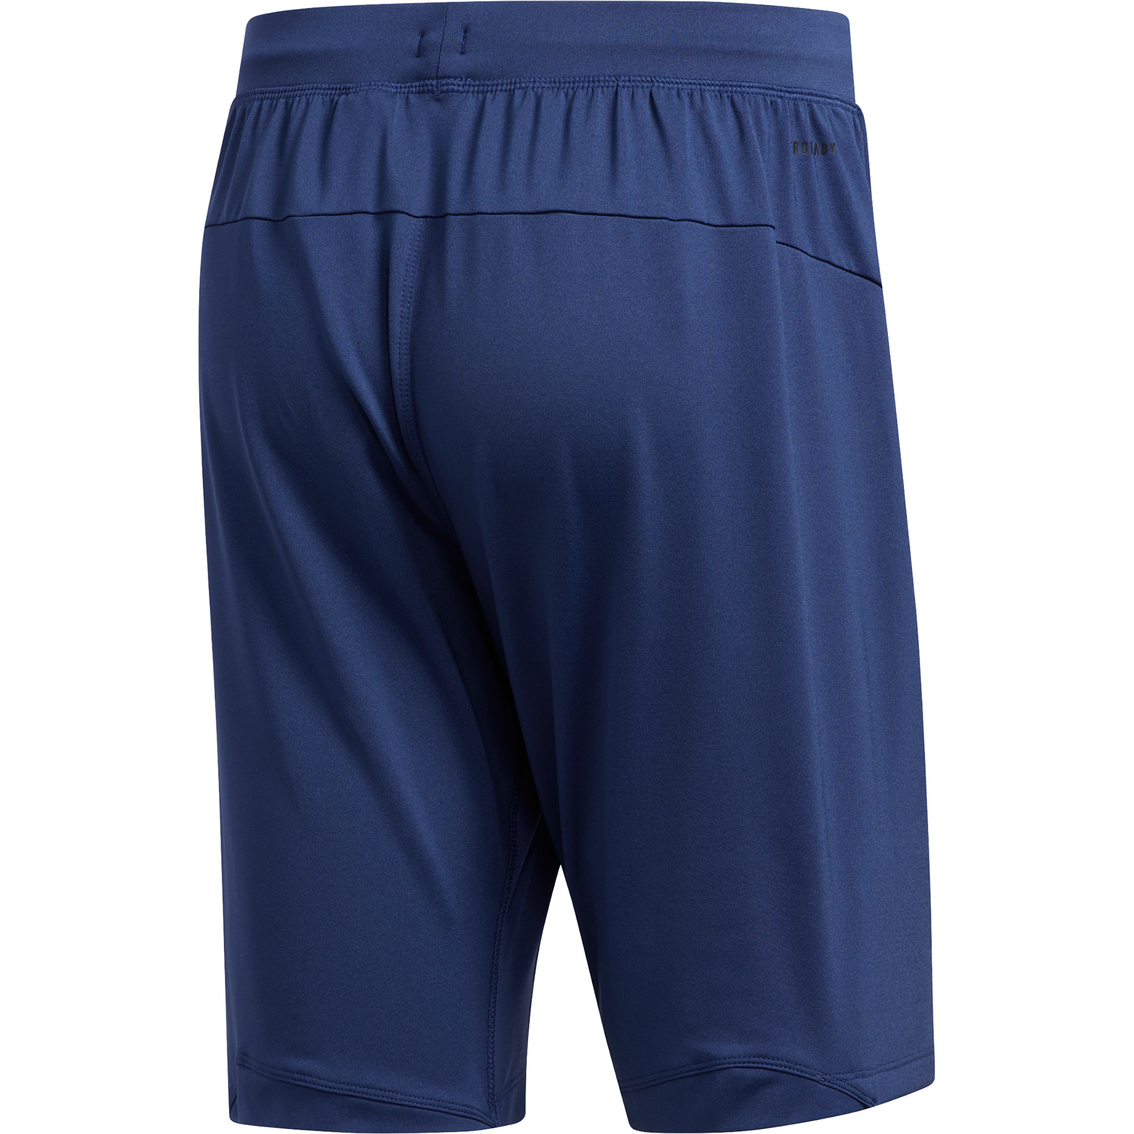 Adidas 4krft Sports Shorts | Shorts | Clothing & Accessories | Shop The ...